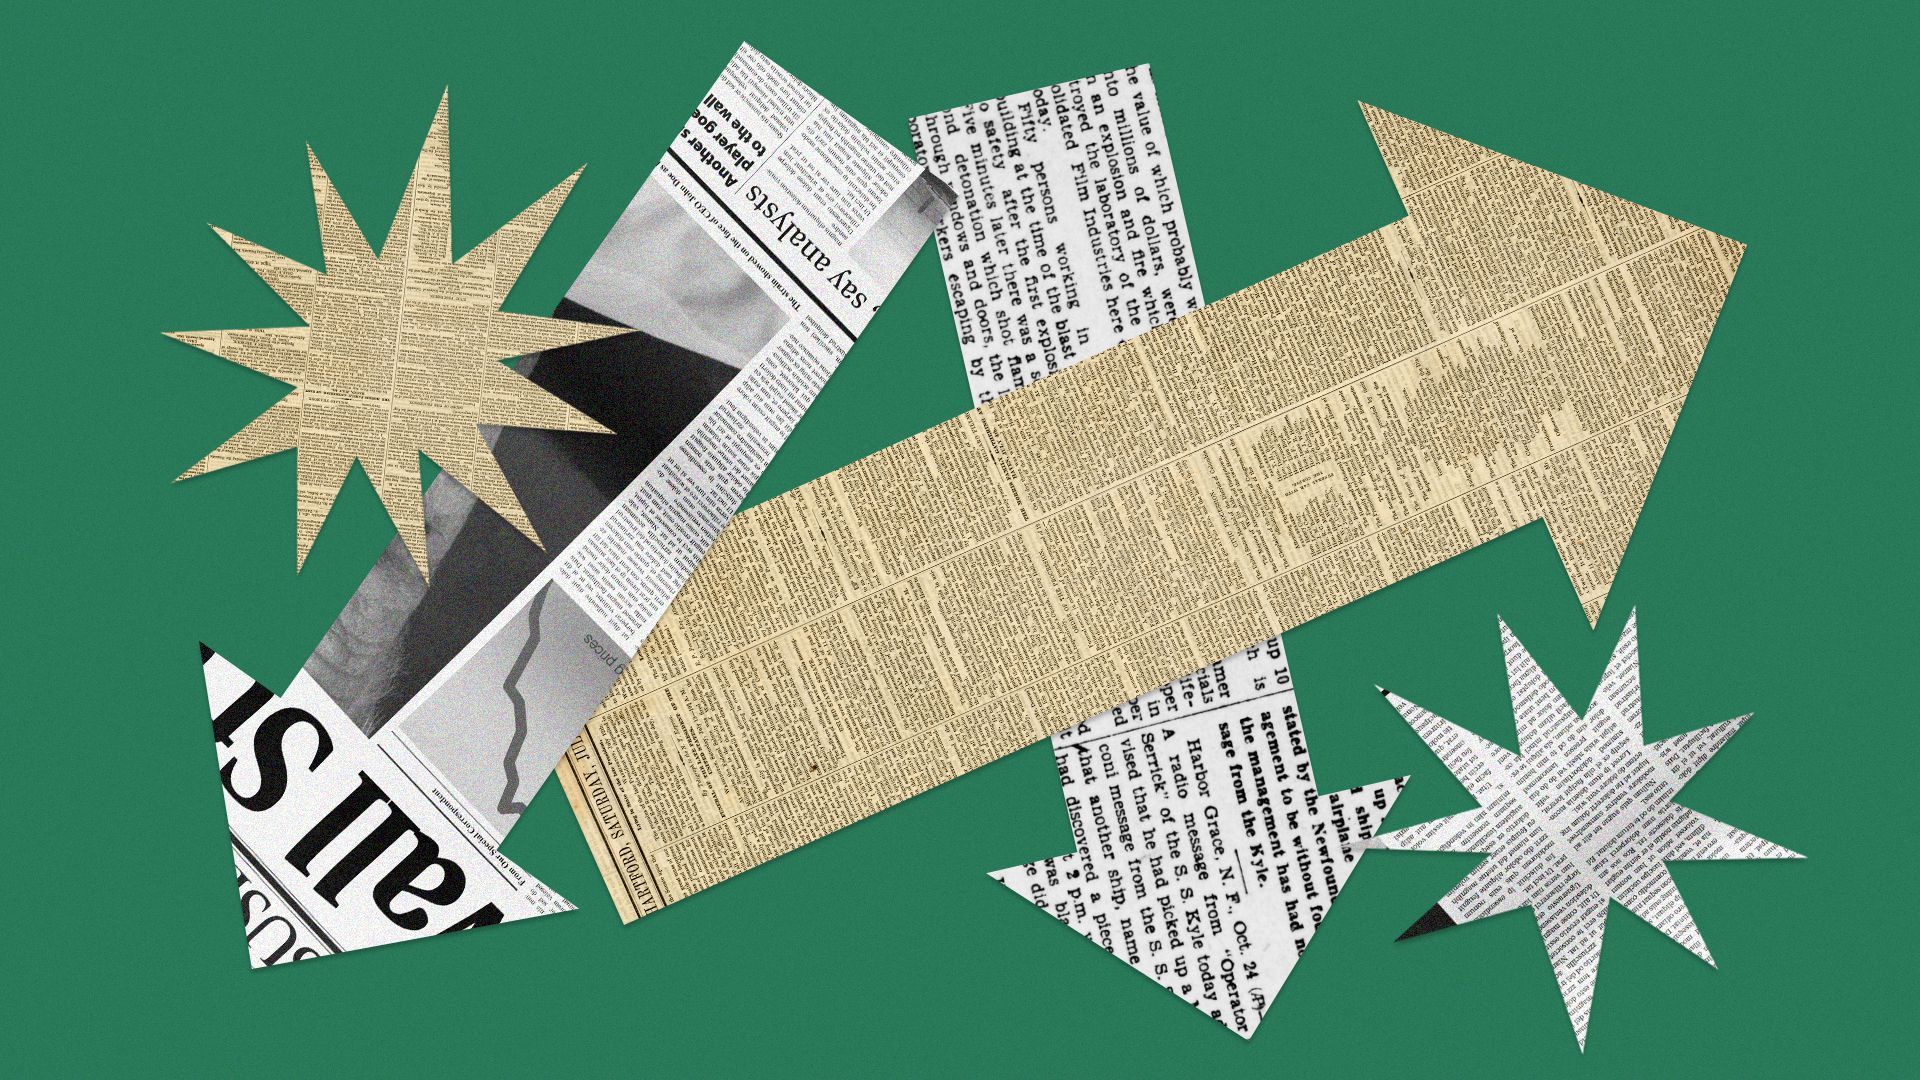 Photo illustration of newspaper cut-outs shaped like bursts and arrows pointing in varying directions